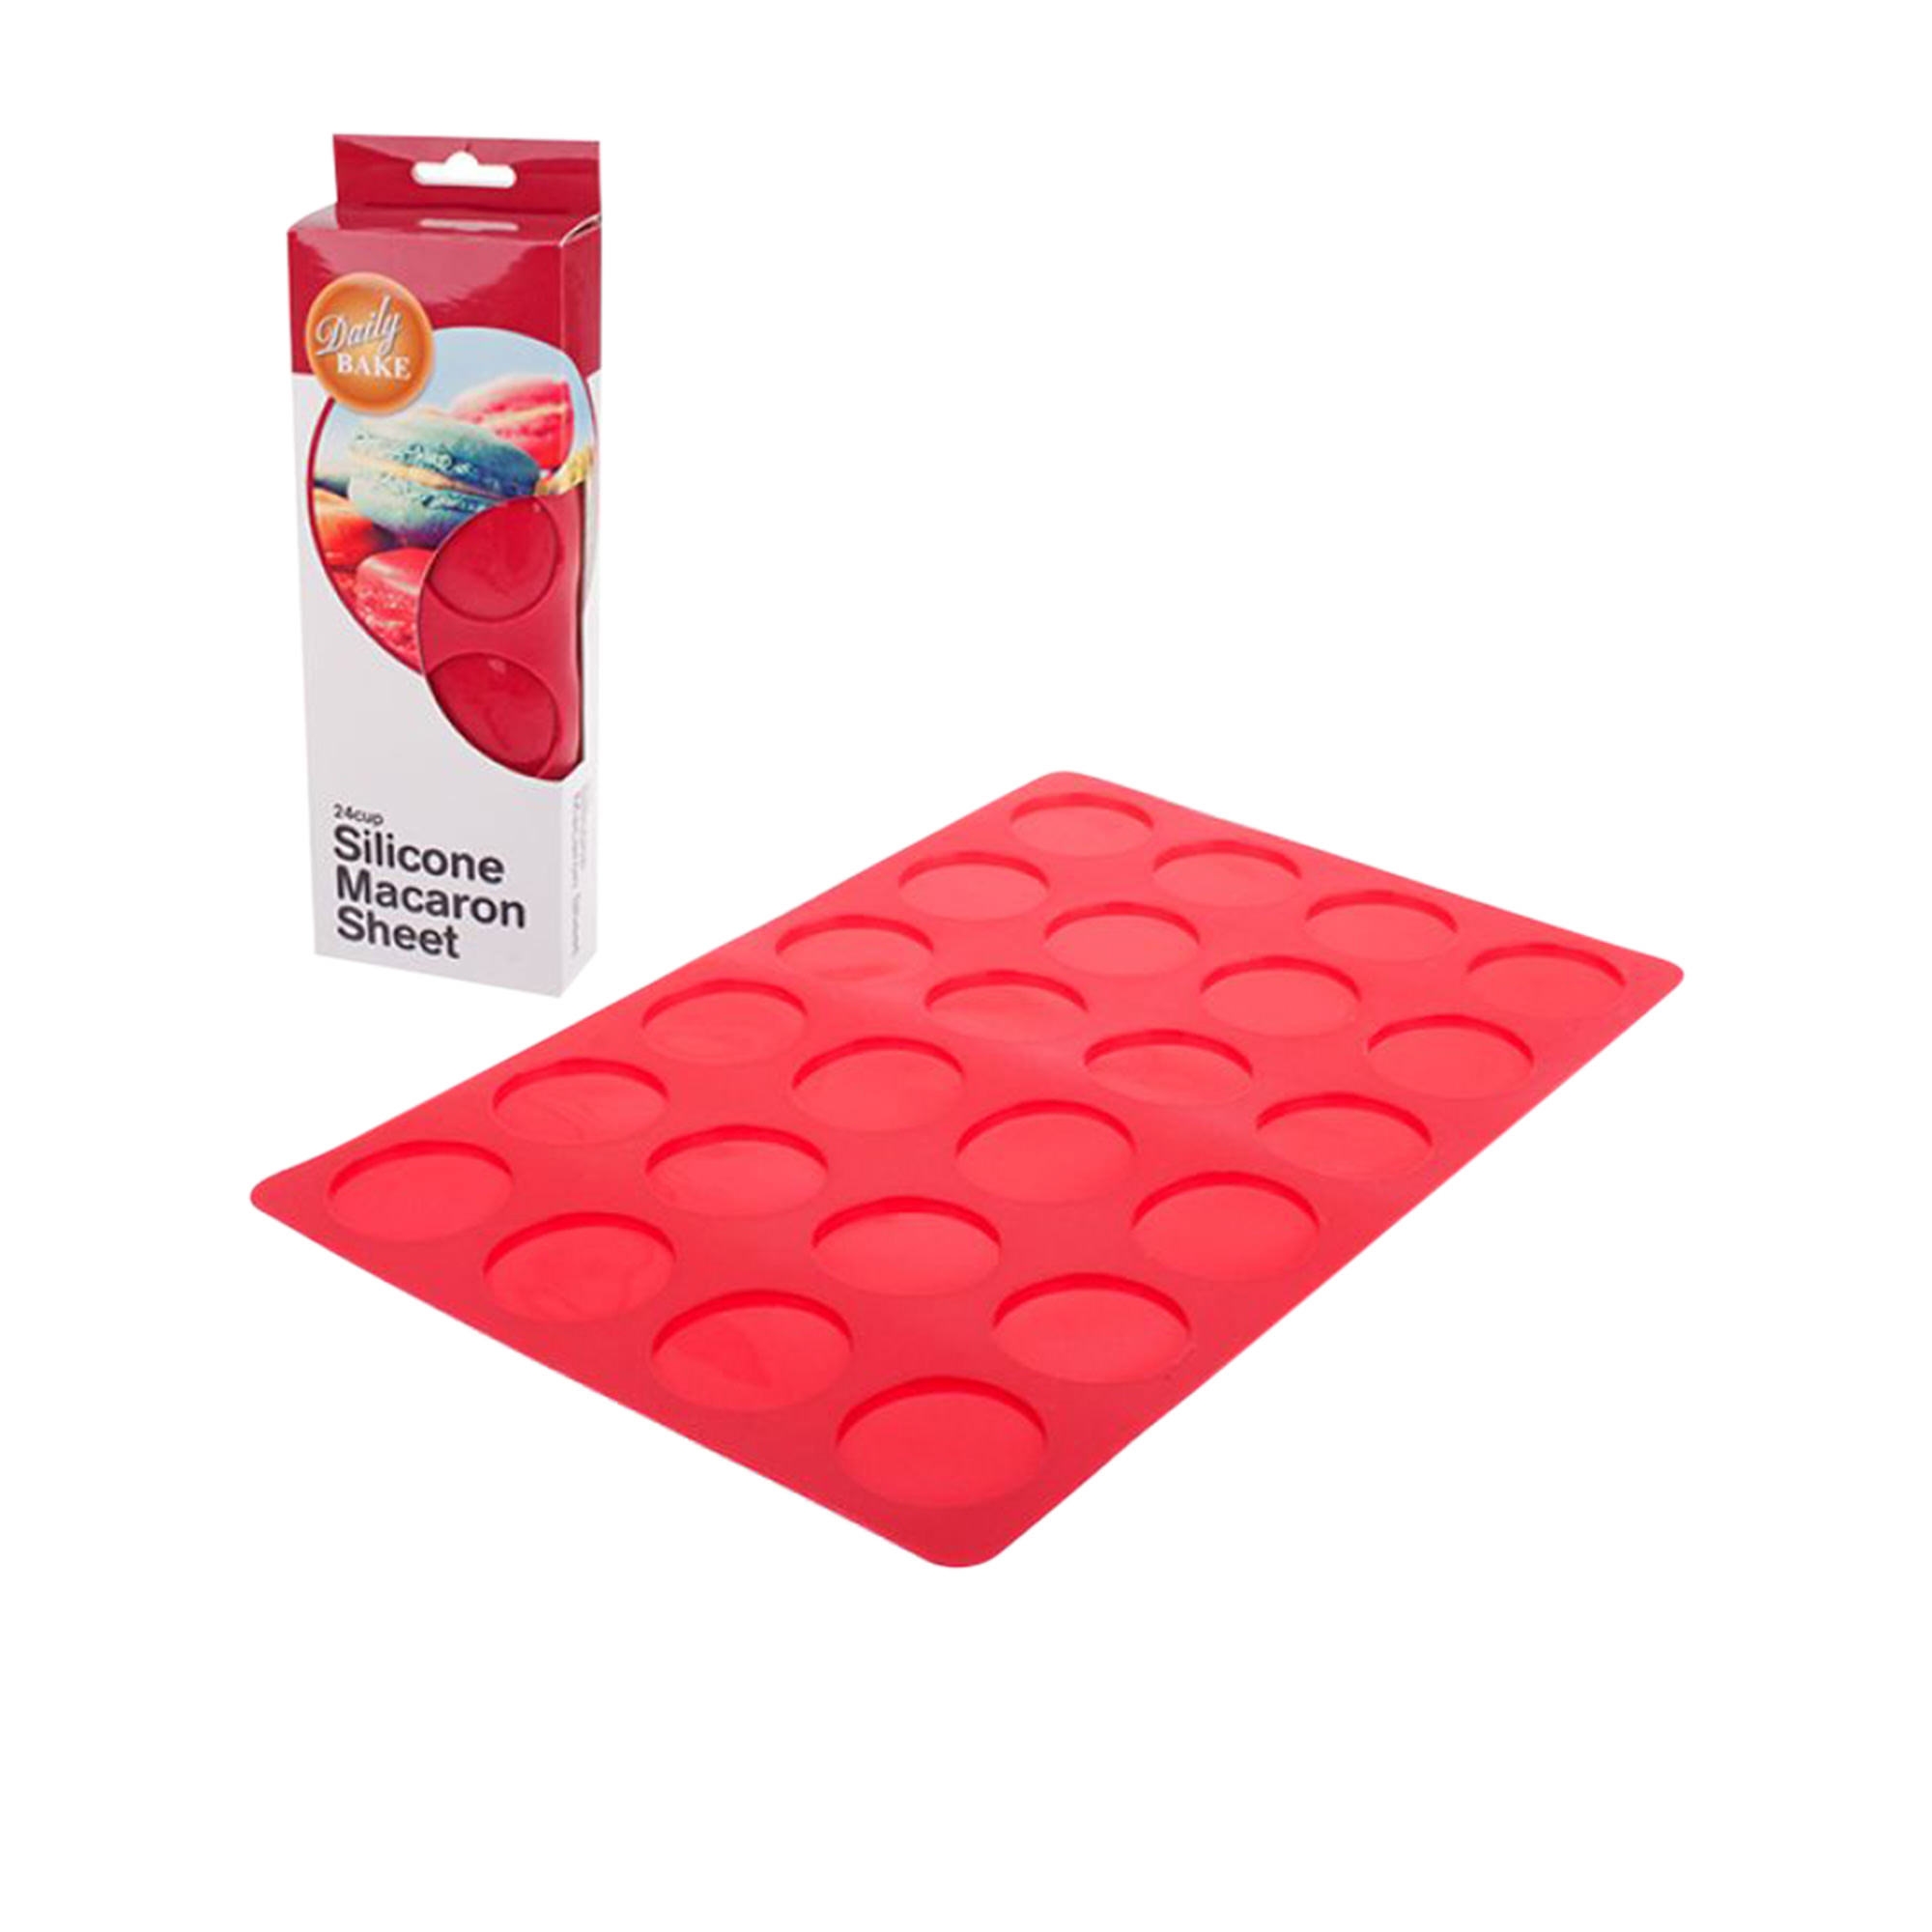 Daily Bake Silicone Macaron Sheet 24 Cup Red Image 1